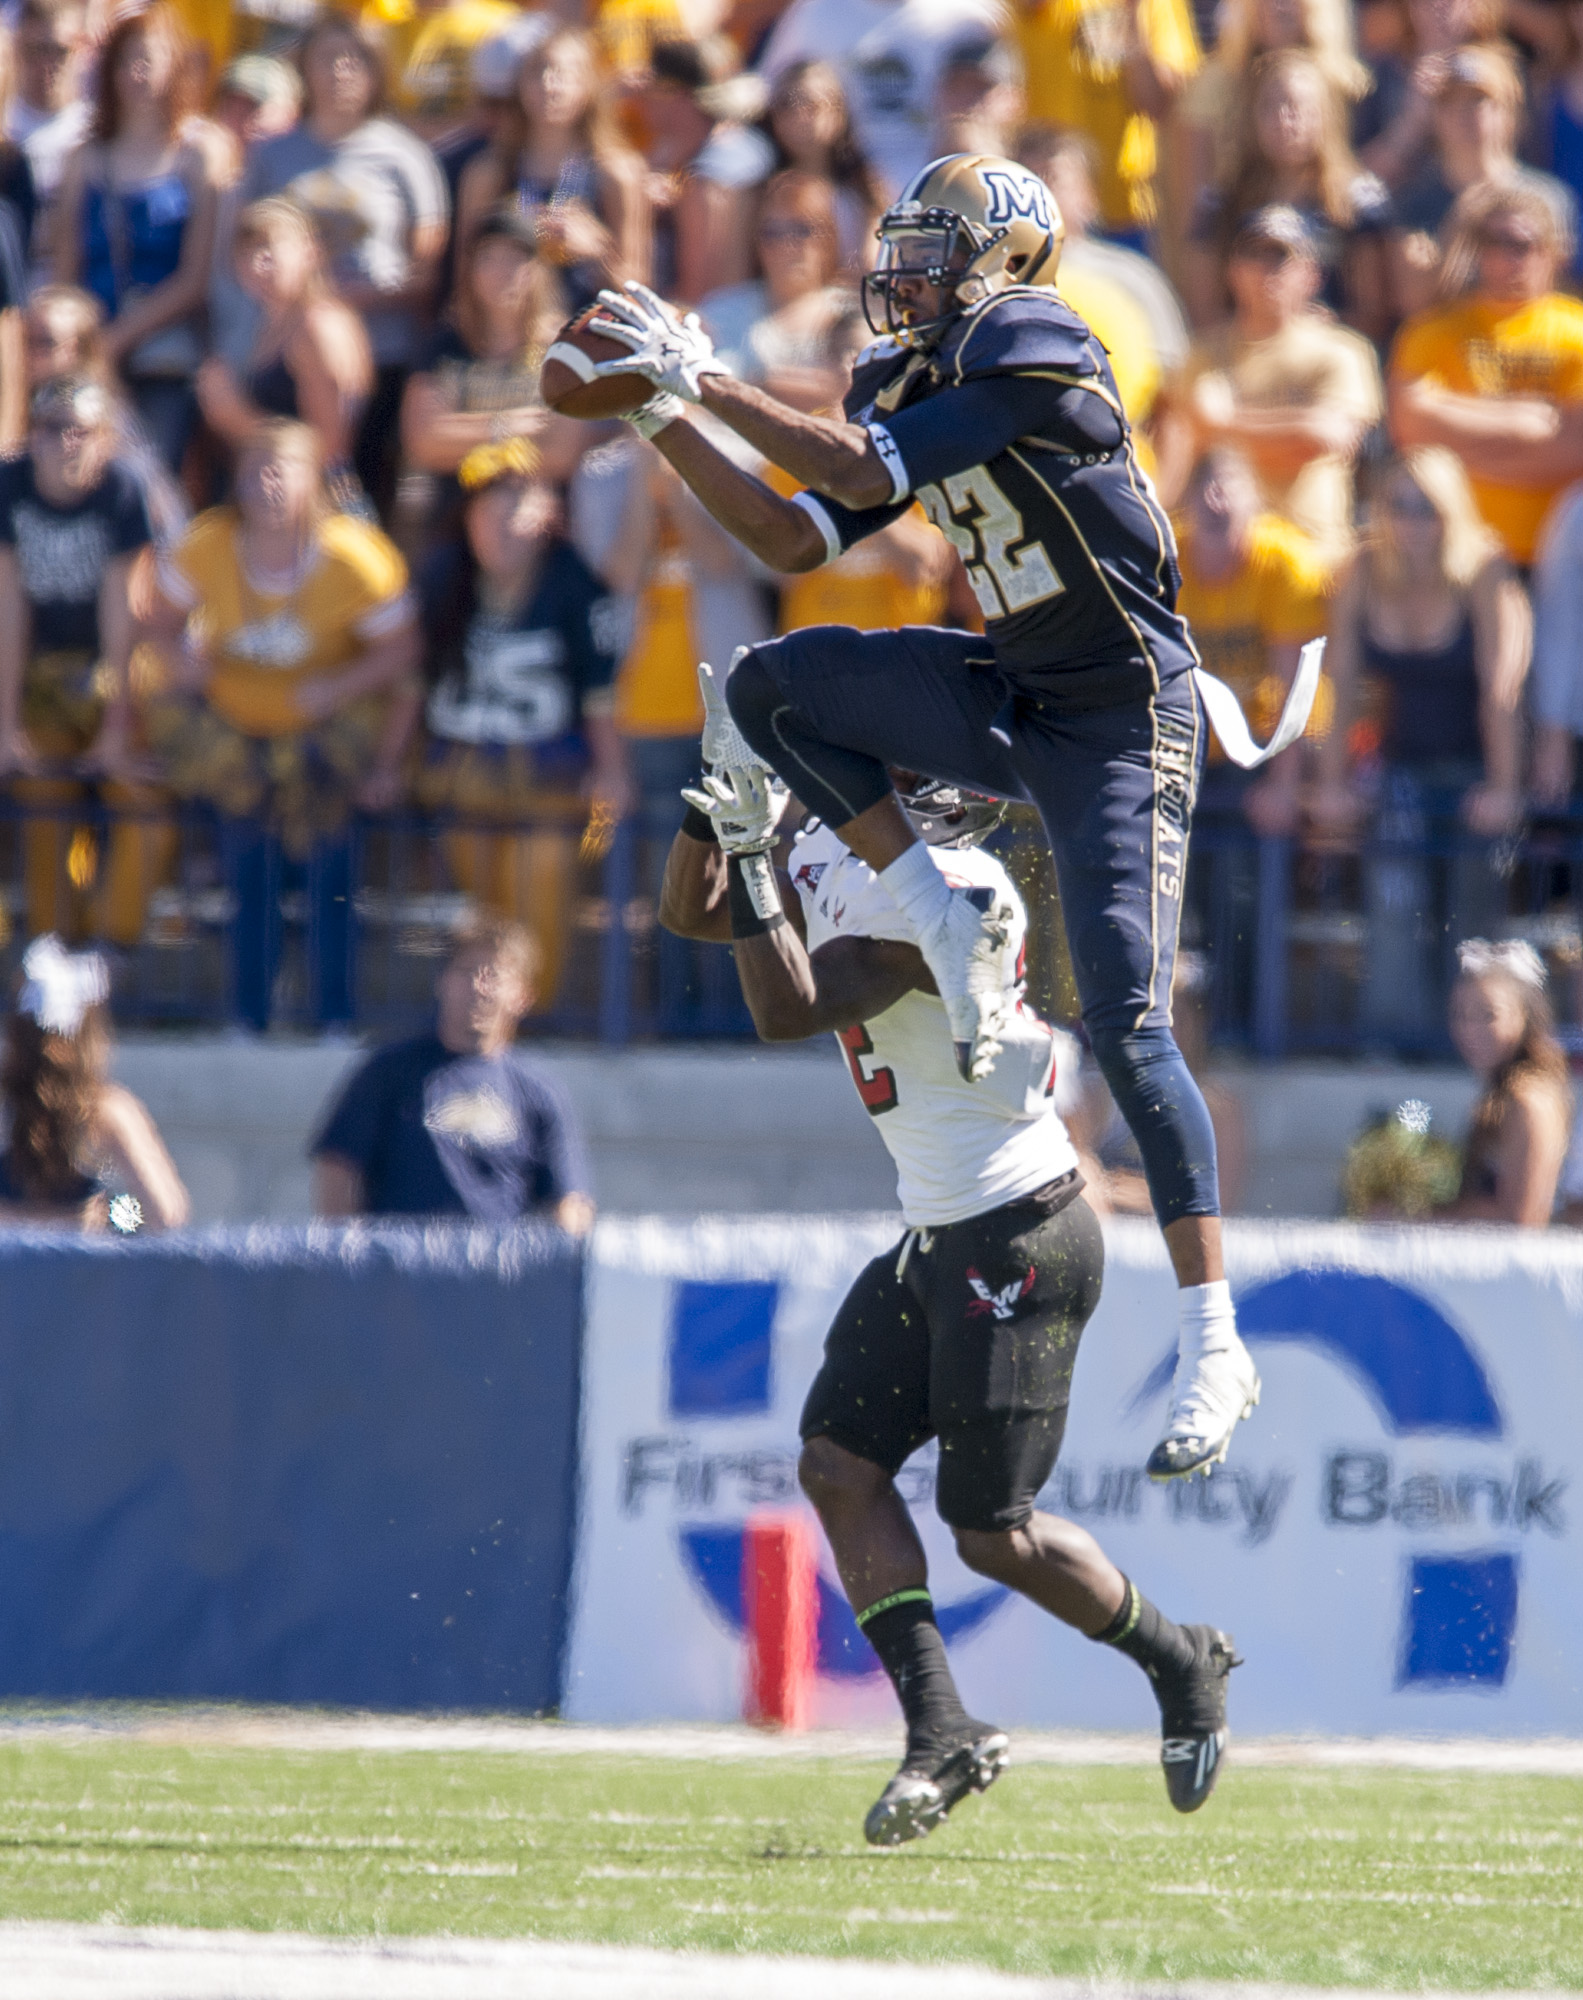 Montana State safety Eryon Barnett, top, jumps for an interception late in the first half of an NCAA college football game against Eastern Washington, Saturday, Sept. 20, 2014, in Bozeman, Mont. (AP Photo/Montana State University, Kelly Gorham)